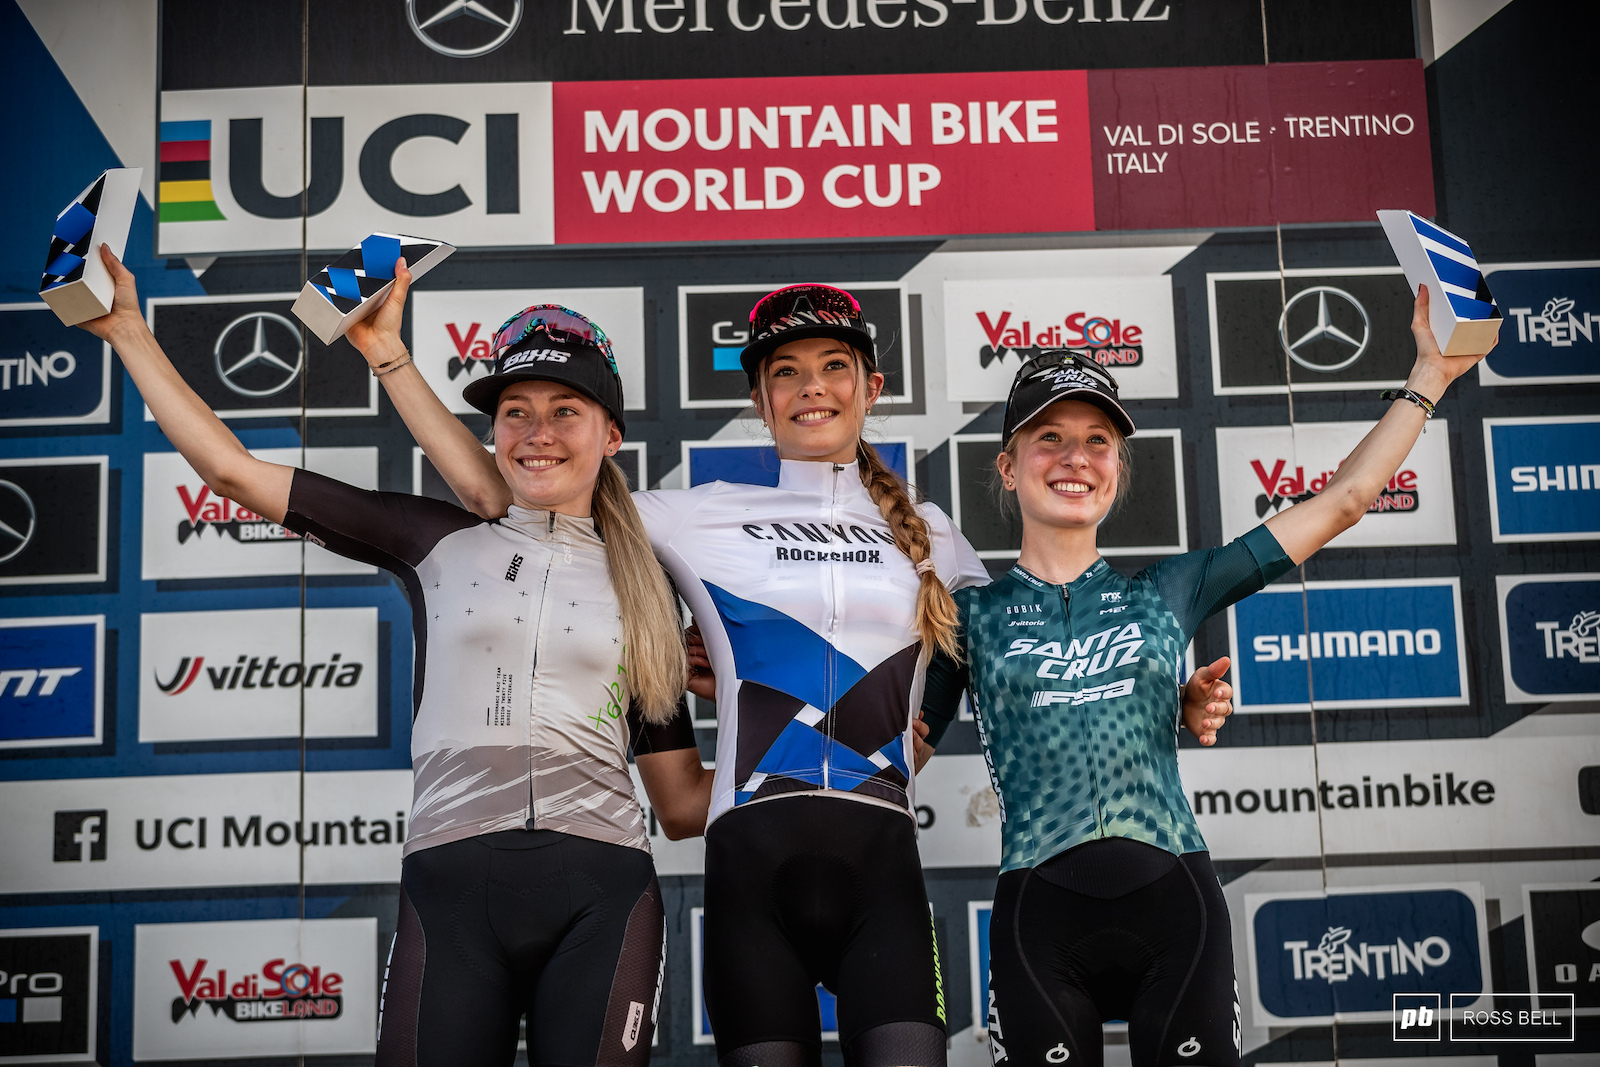 Line Burquier also wrapped up the U23 Women overall. She was joined in the top 3 by Noelle Buri and Sara Cortinovis.